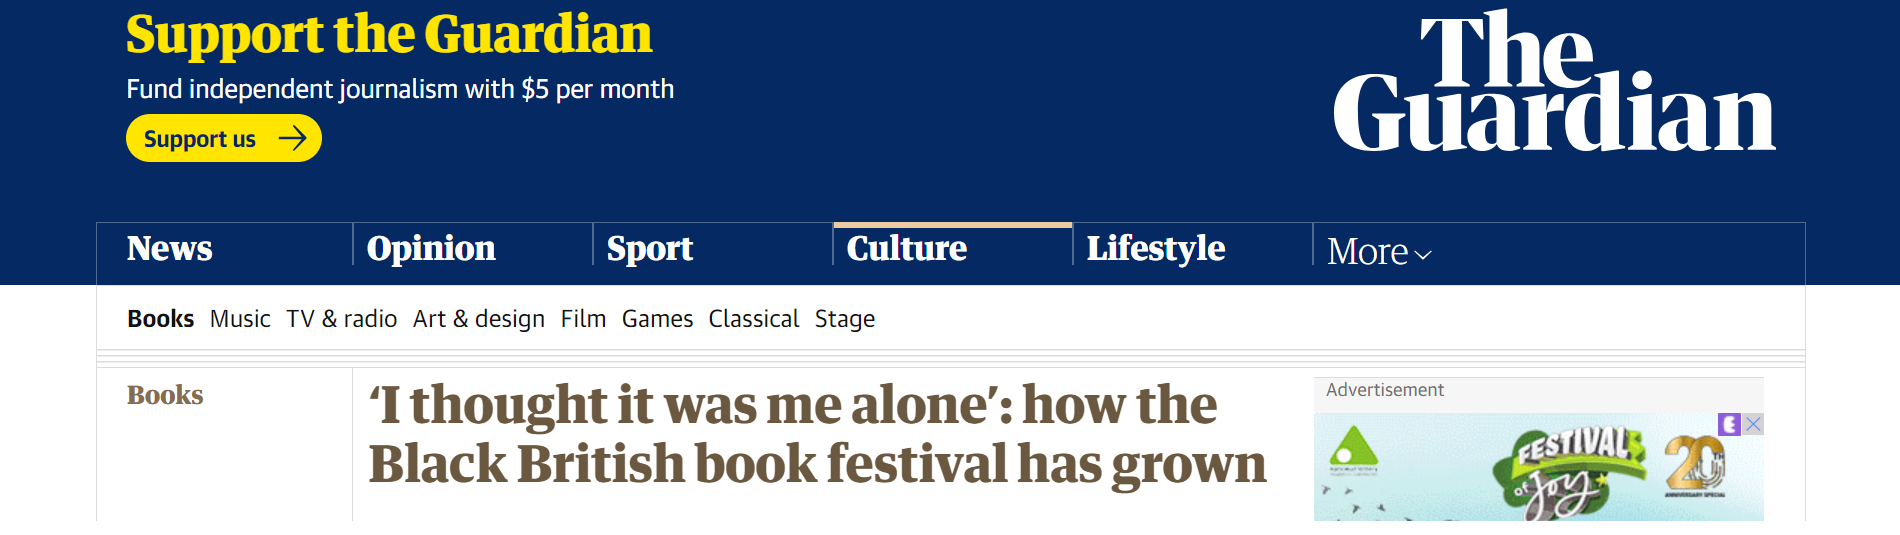 ‘I-thought-it-was-me-alone’-how-the-Black-British-book-festival-has-grown-Books-The-Guardian